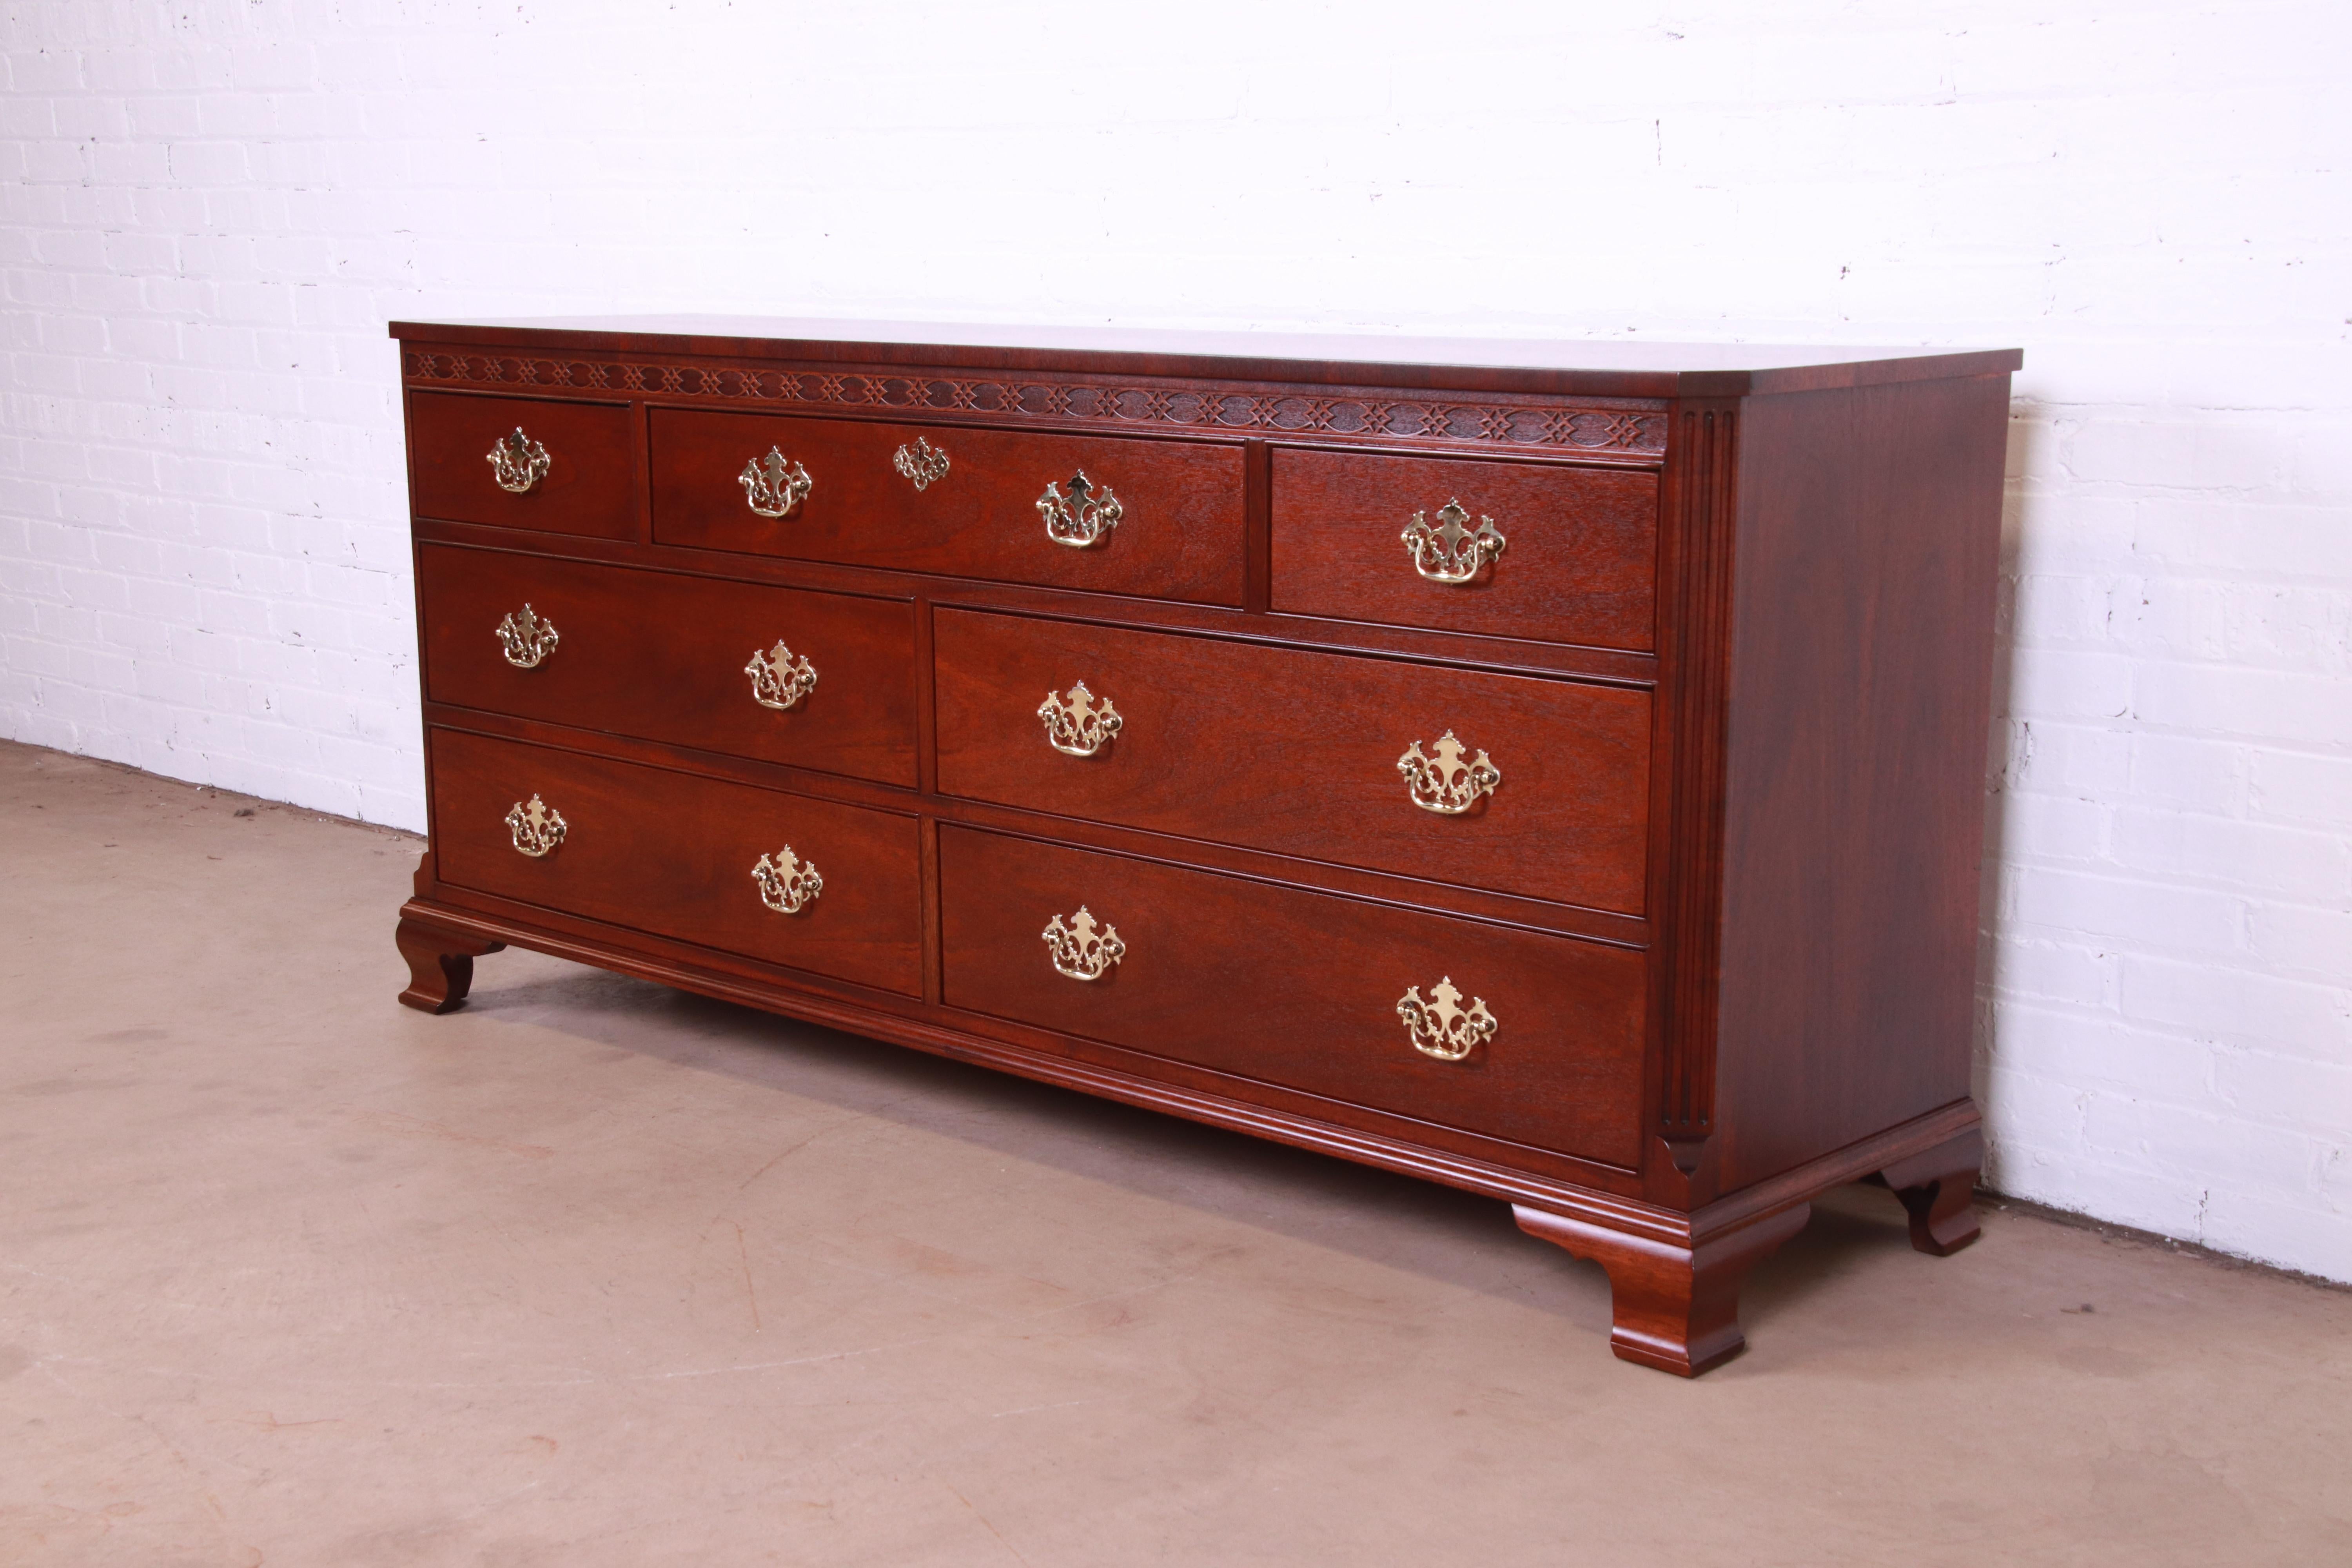 20th Century Baker Furniture Chippendale Carved Mahogany Dresser or Credenza, Refinished